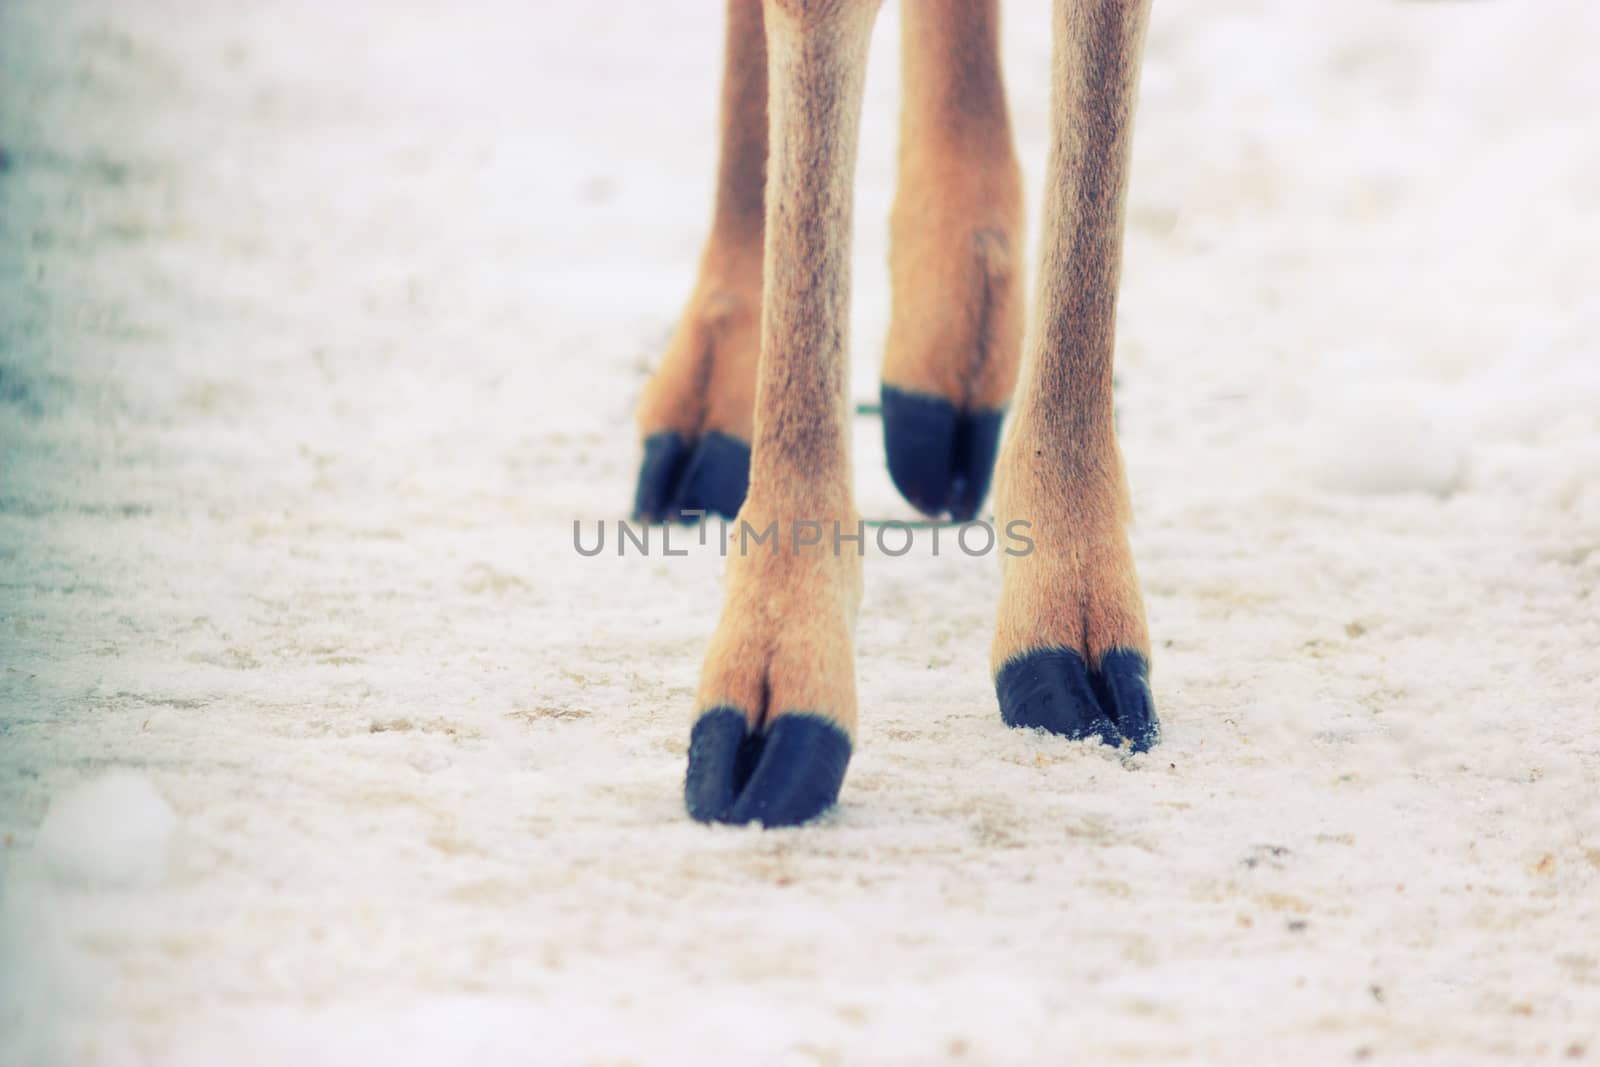 four hooves of aninal with hooves on a snow.